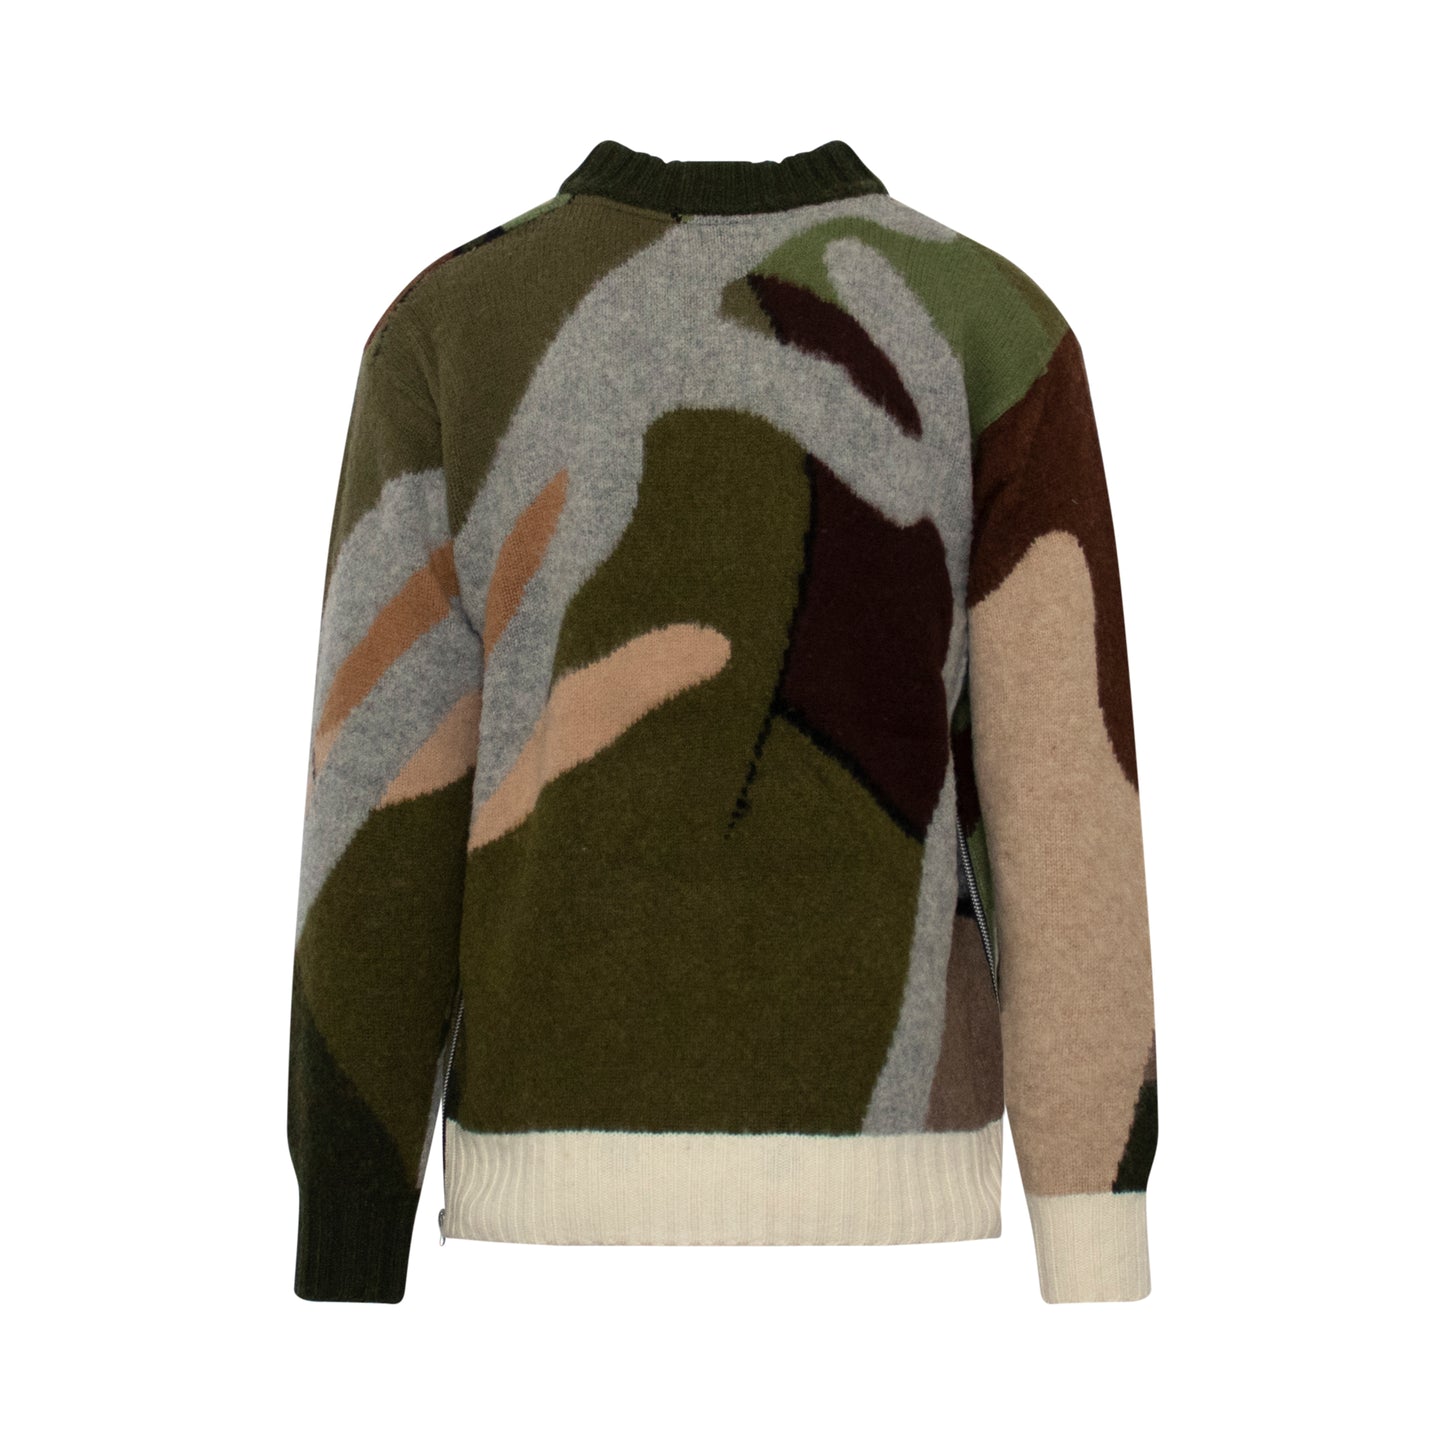 Kaws Jaqcuard Knit Sweater in Camouflage